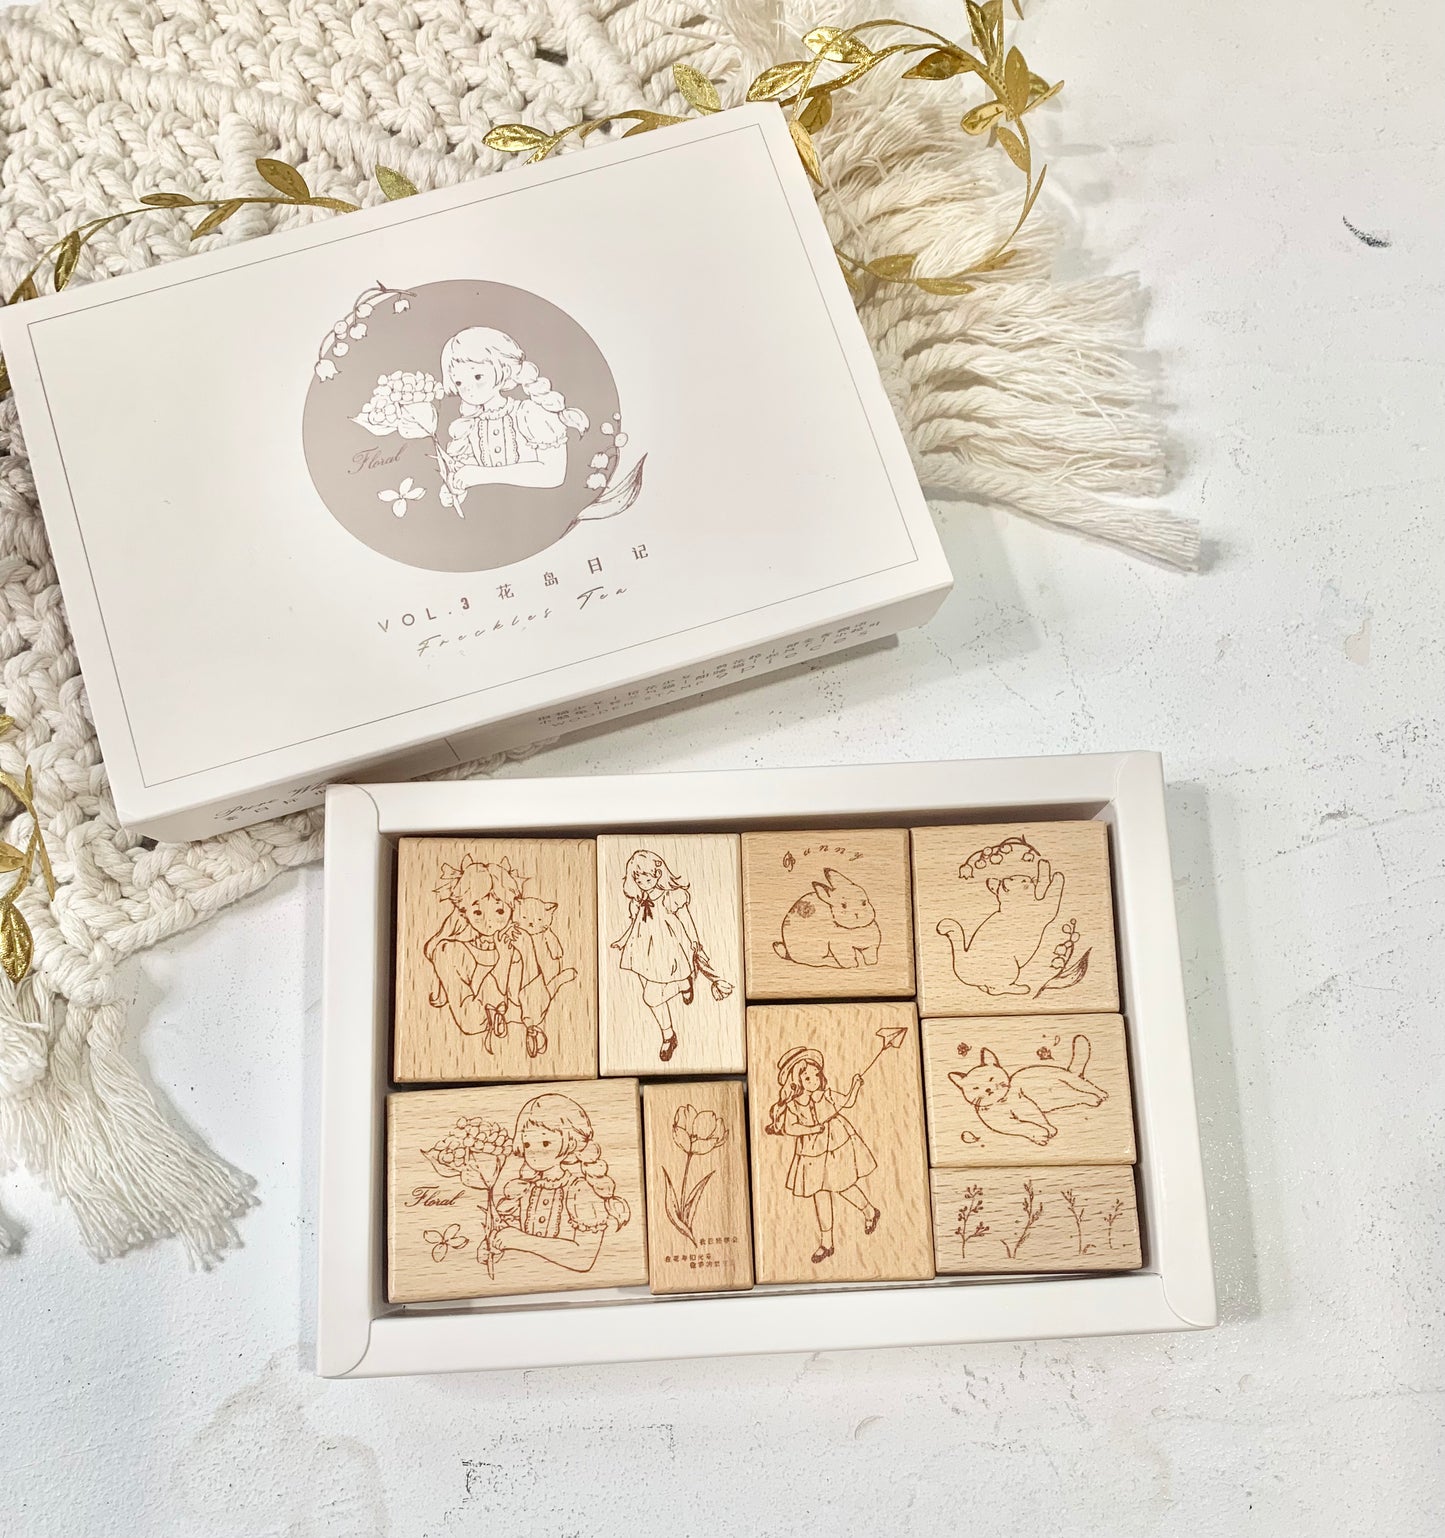 NEW Freckles Tea Vol.3 - Flower Island Diary | Rubber Stamps